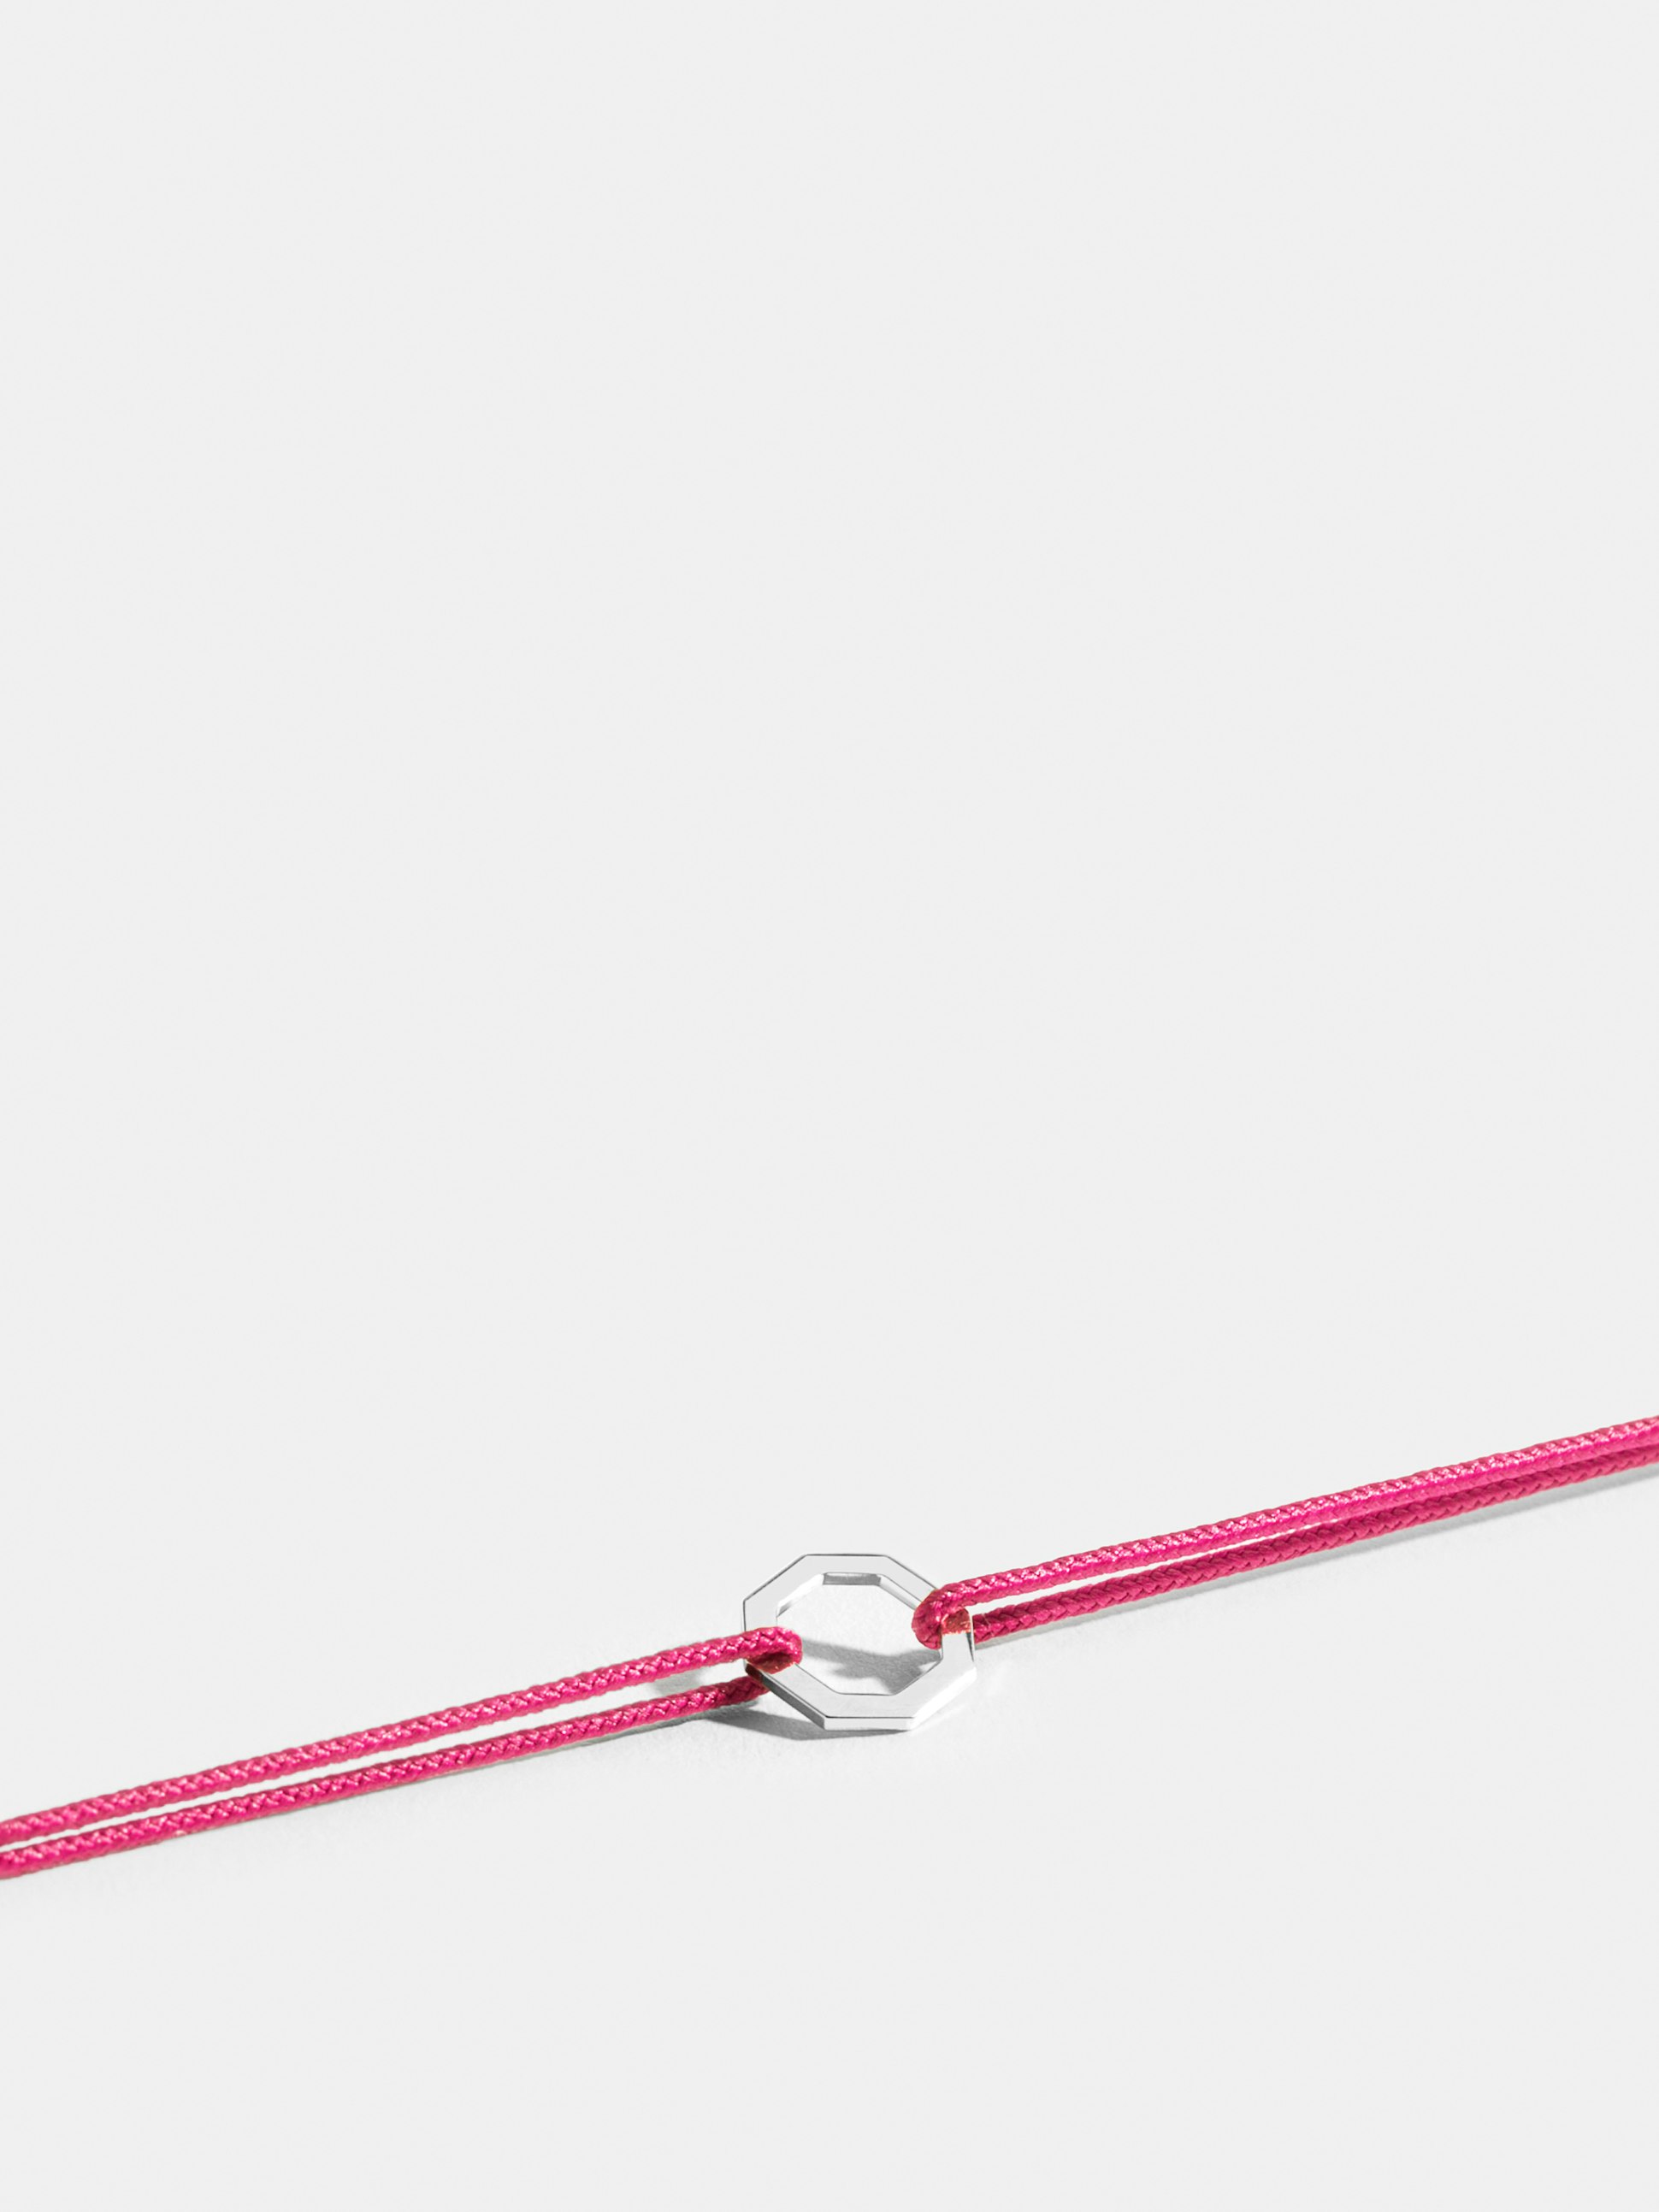 Octogone motif in 18k Fairmined ethical white gold, on a fuschia pink cord. 